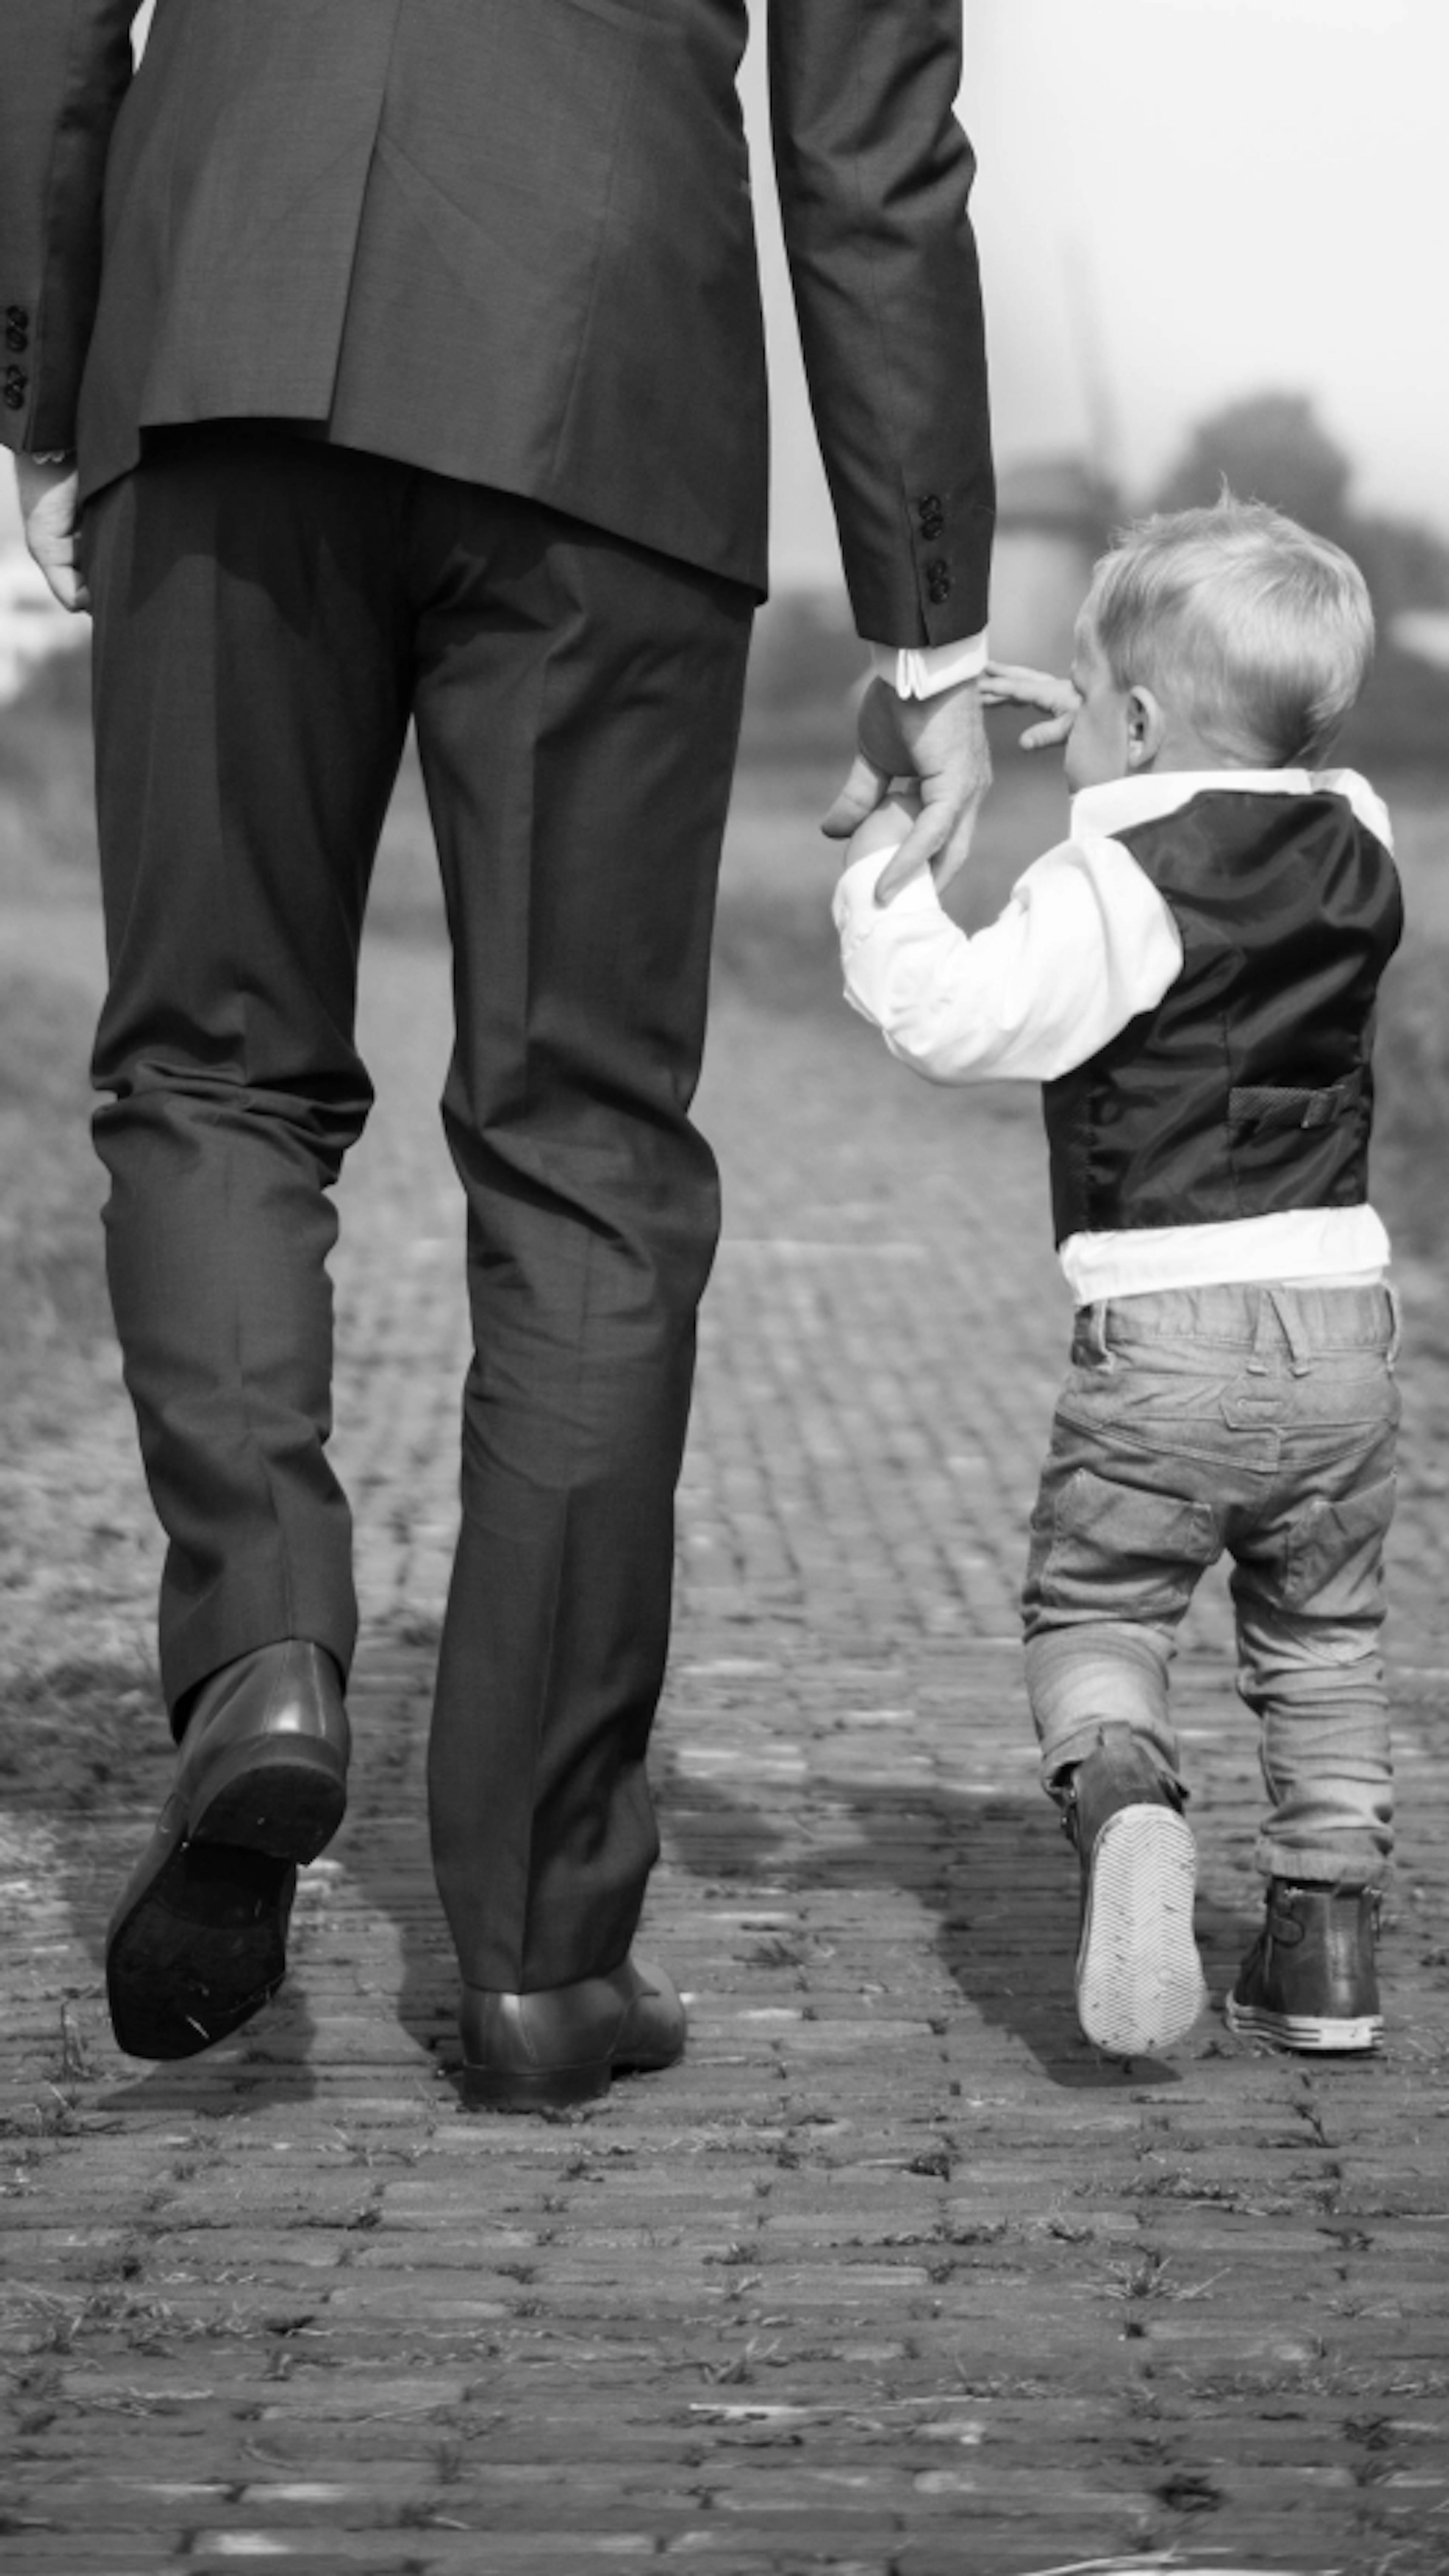 A man and child walking, holding hands.